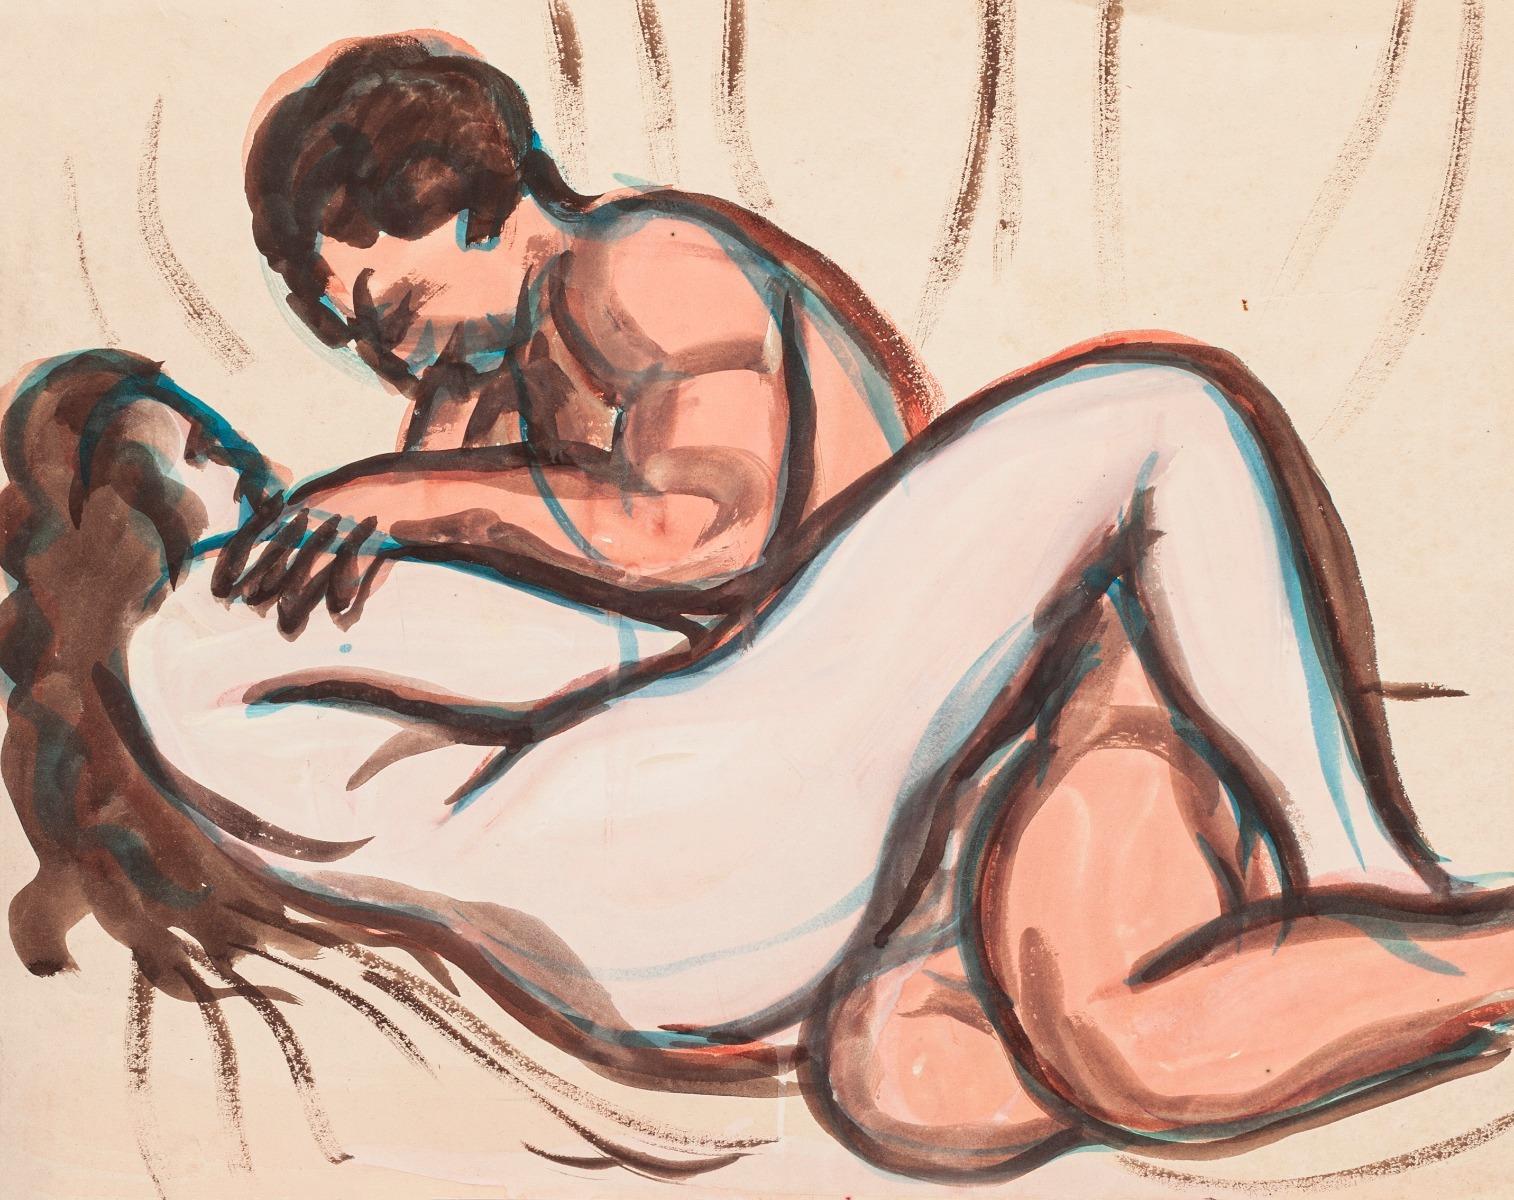 Unknown Nude - Lovers - Watercolor - 1950 ca.